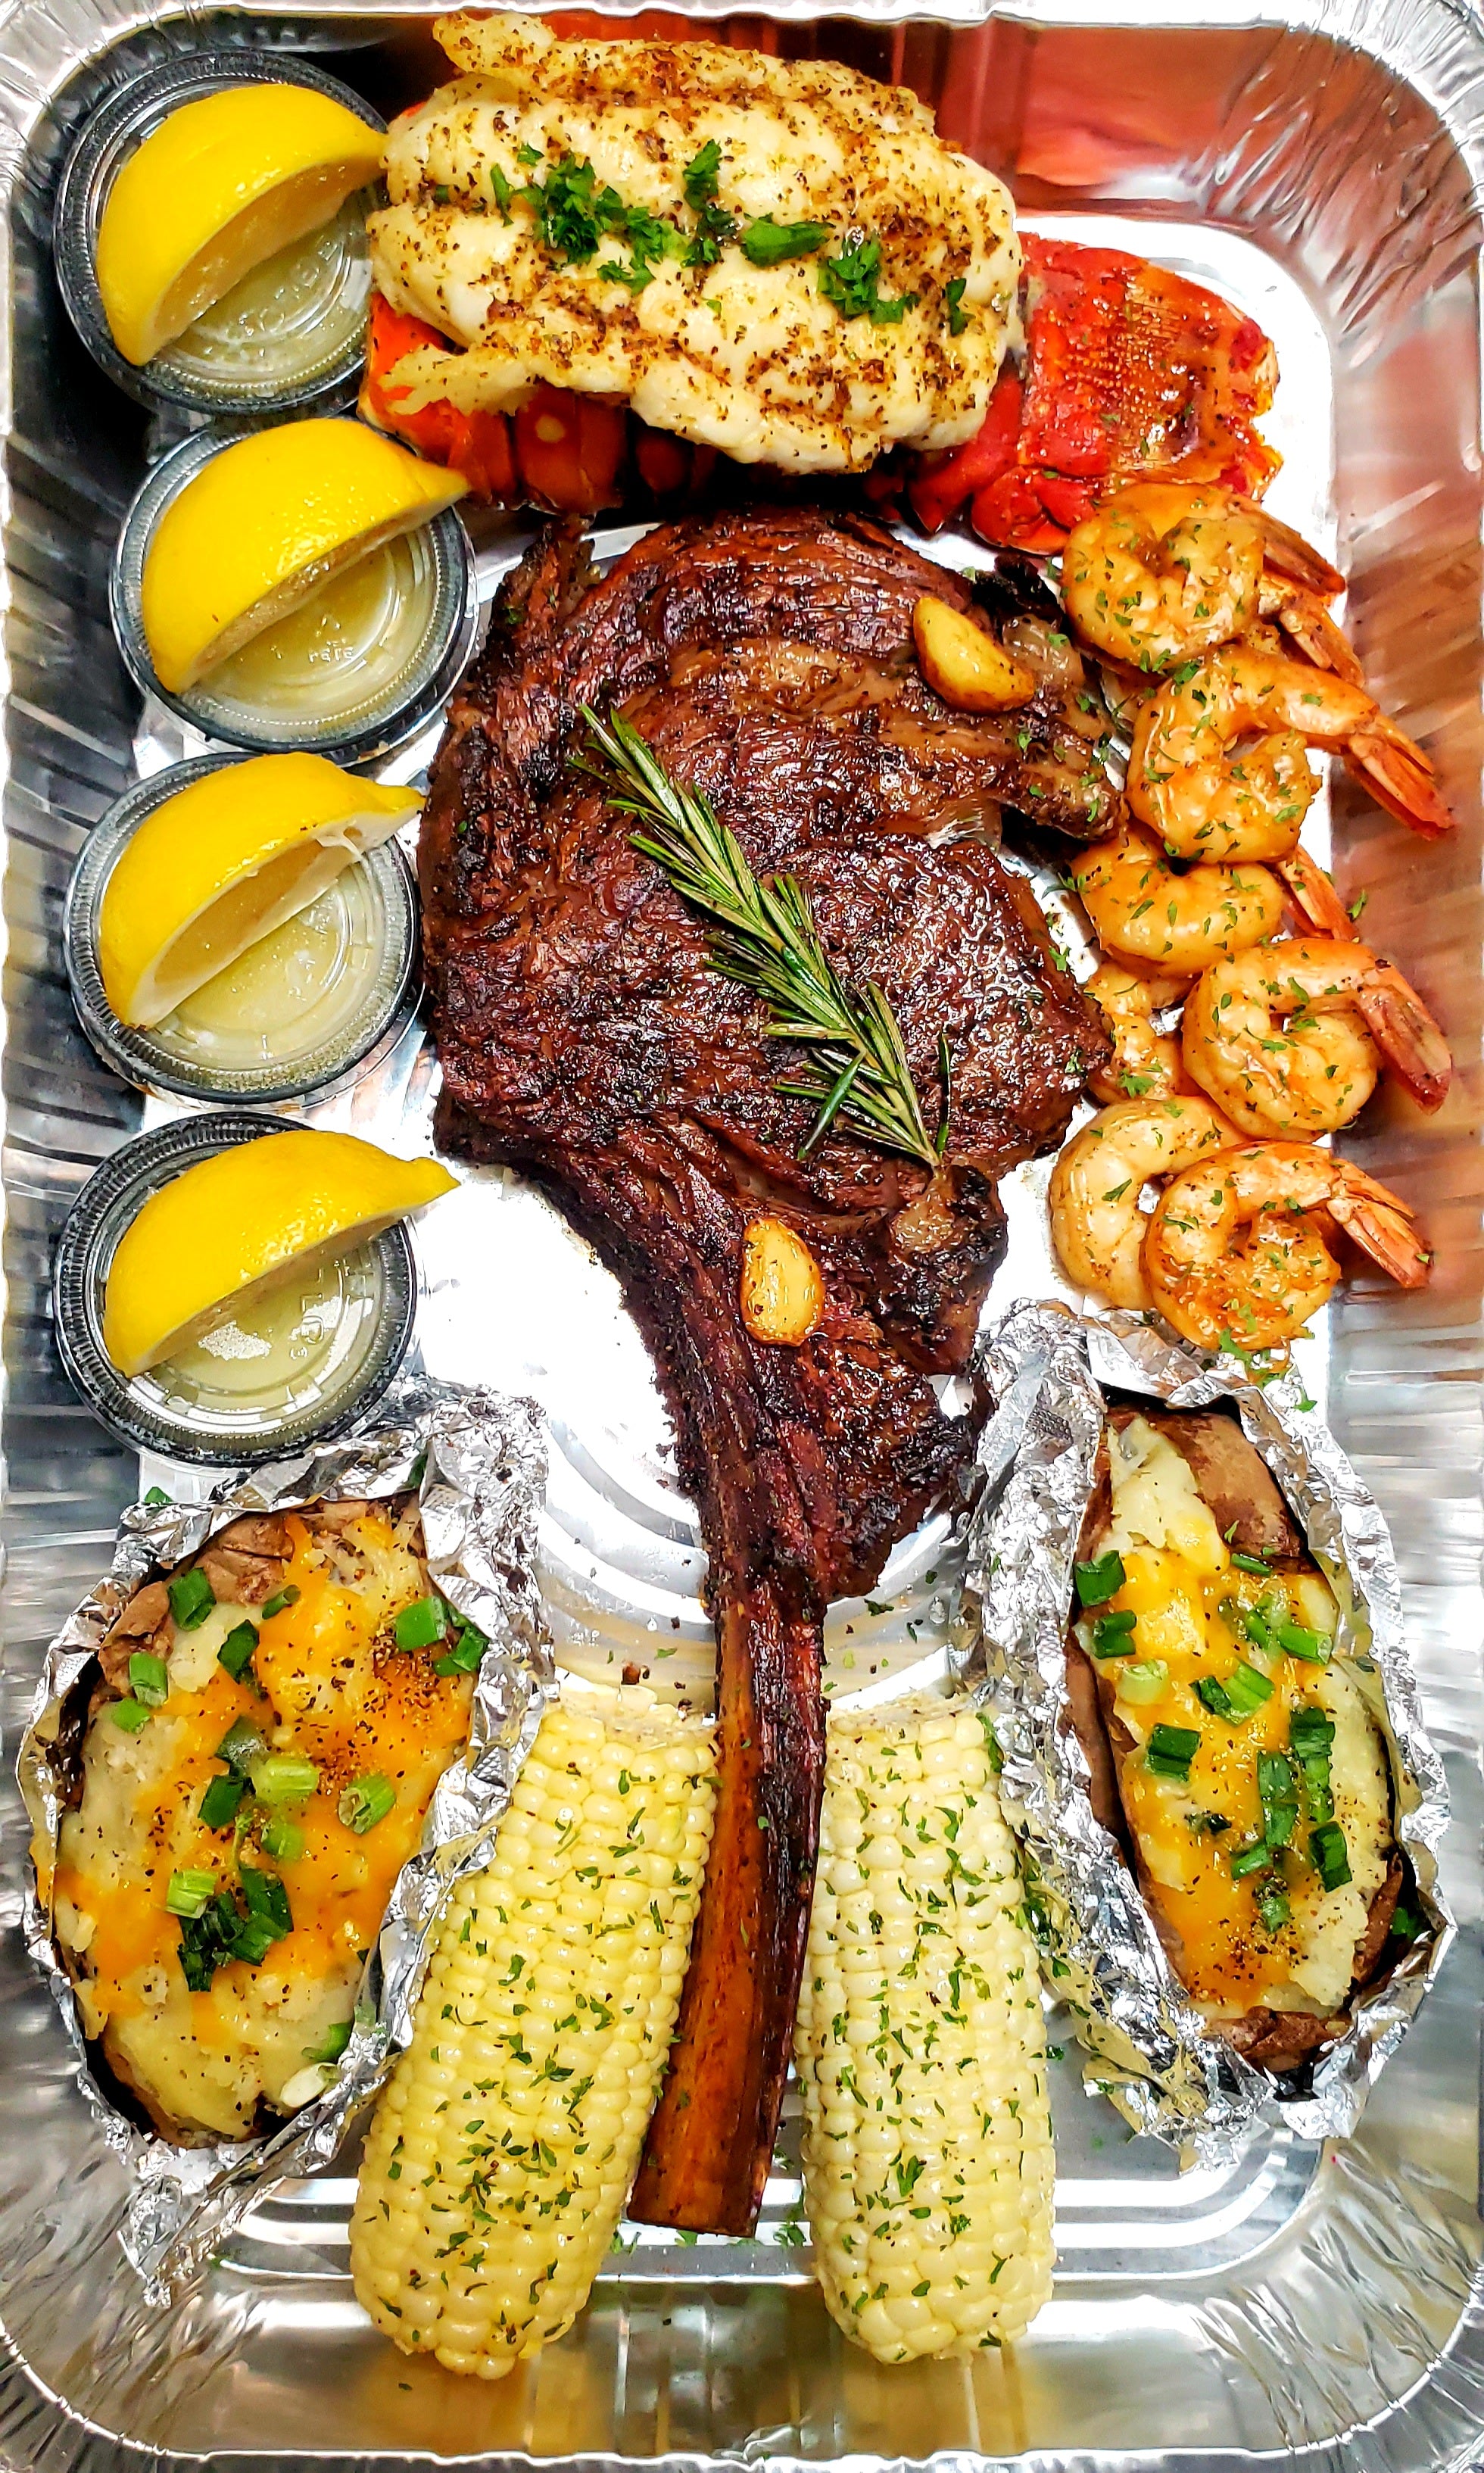 Surf 'N Turf - Tomahawk and Maine Lobster Tails - Vermont Wagyu